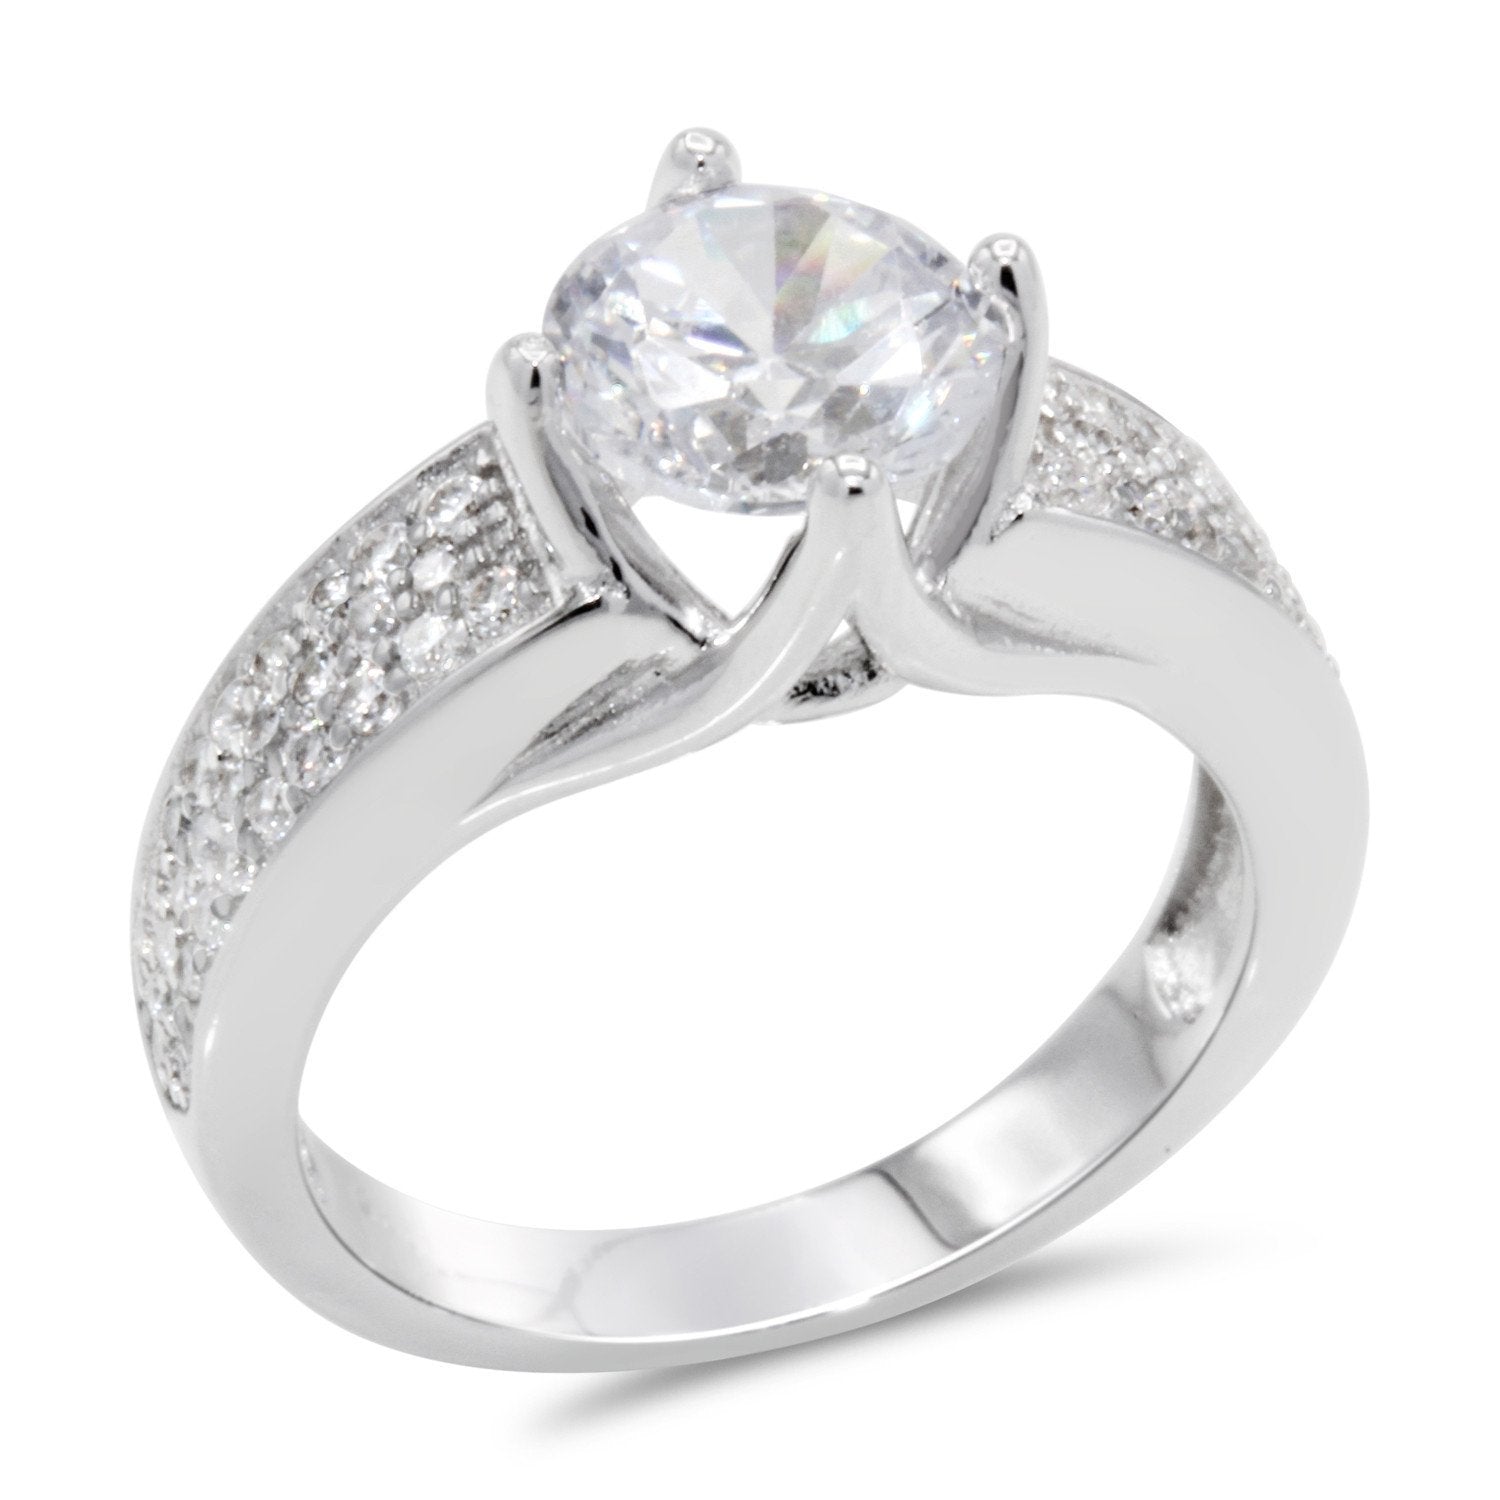 CZ 7mm Sterling Silver Plated Crossover Halo Promise, Engagement Ring